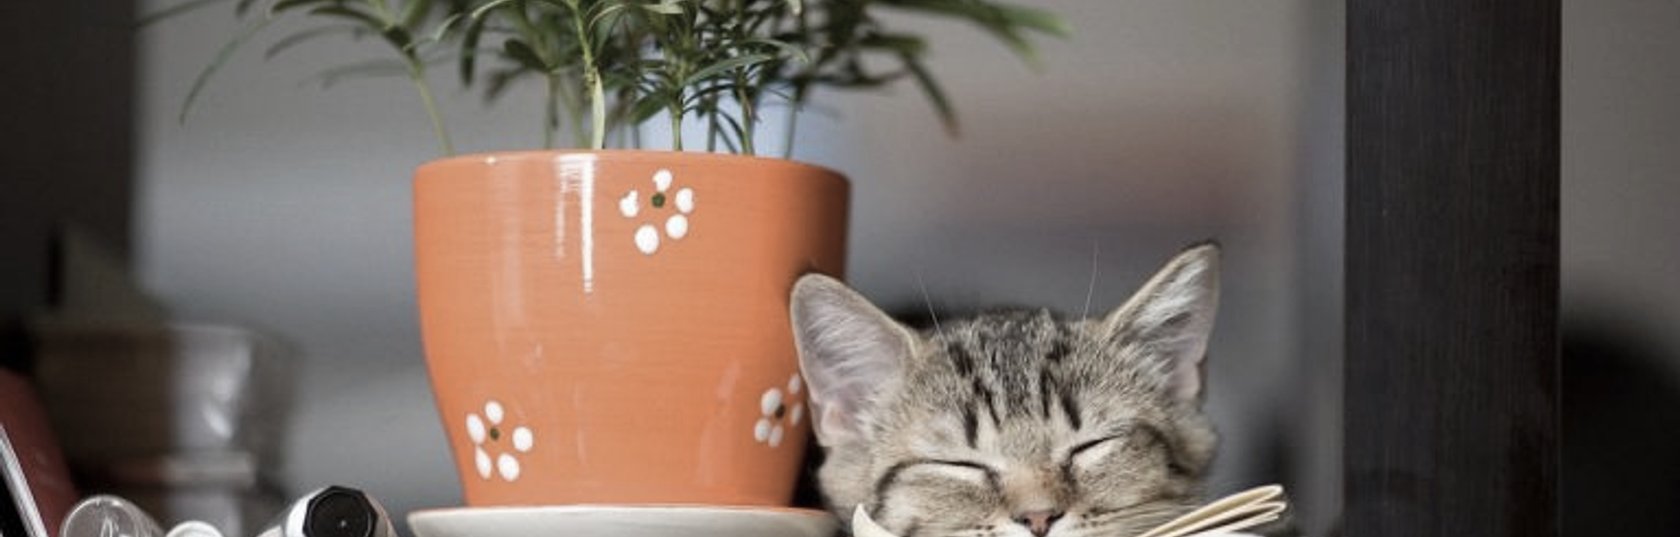 Pet Friendly Plants For Your Home